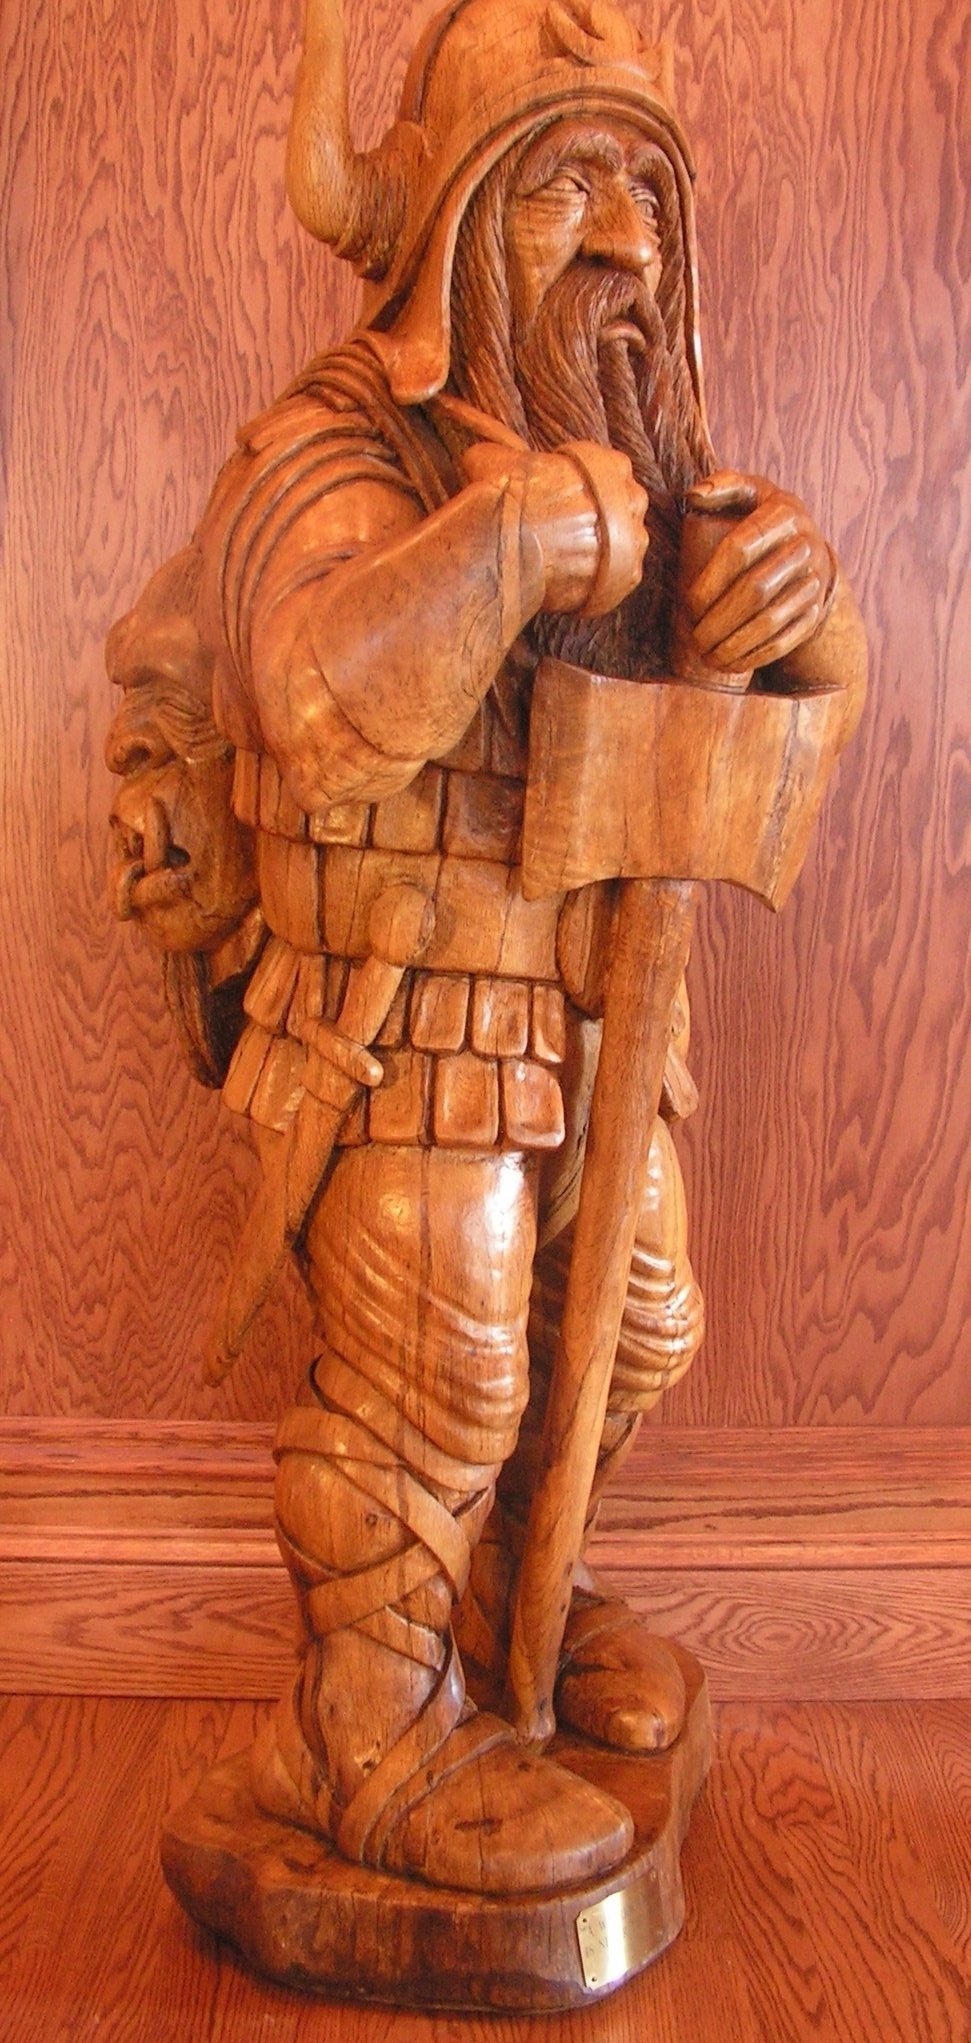 Ronald Smith: 'A Warrior Dwarf is Never Too Old', 1997 , Figurative.  A Warrior Dwarf is Never Too Old , Sculpture, wood, fantasy, Tolkien, mythology, figurative, representational...